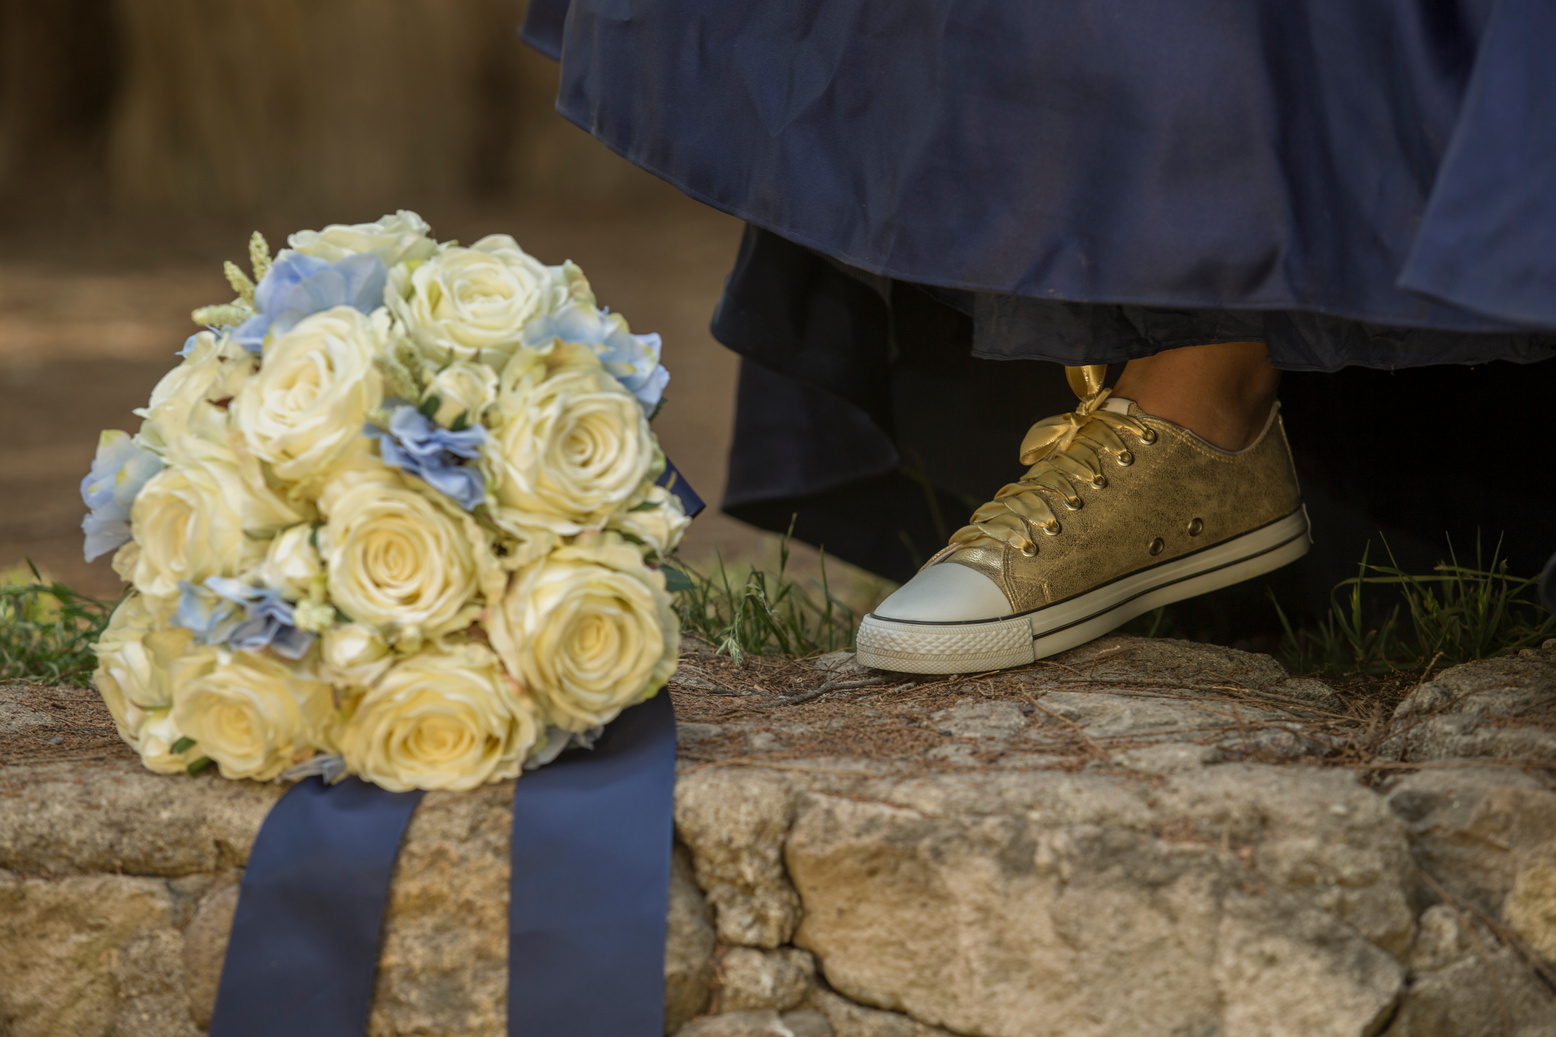 detail of golden tennis shoes, elegant blue dress and a flower arrangement of white roses, fifteen year party concept, fifteen years